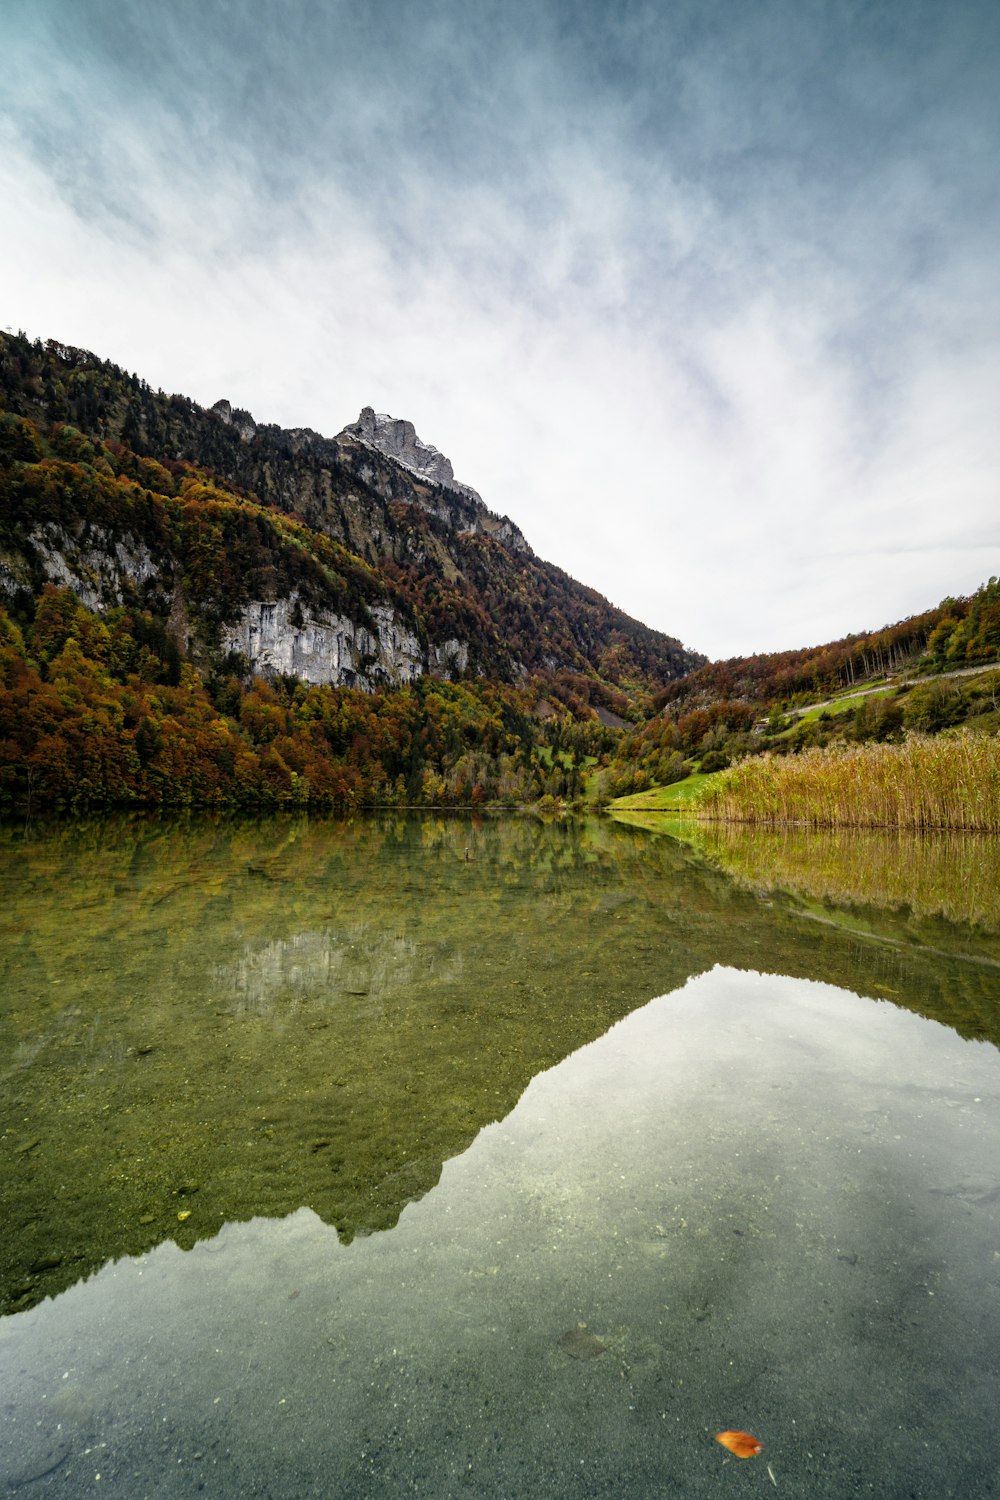 green and brown mountain beside lake under cloudy sky during daytime